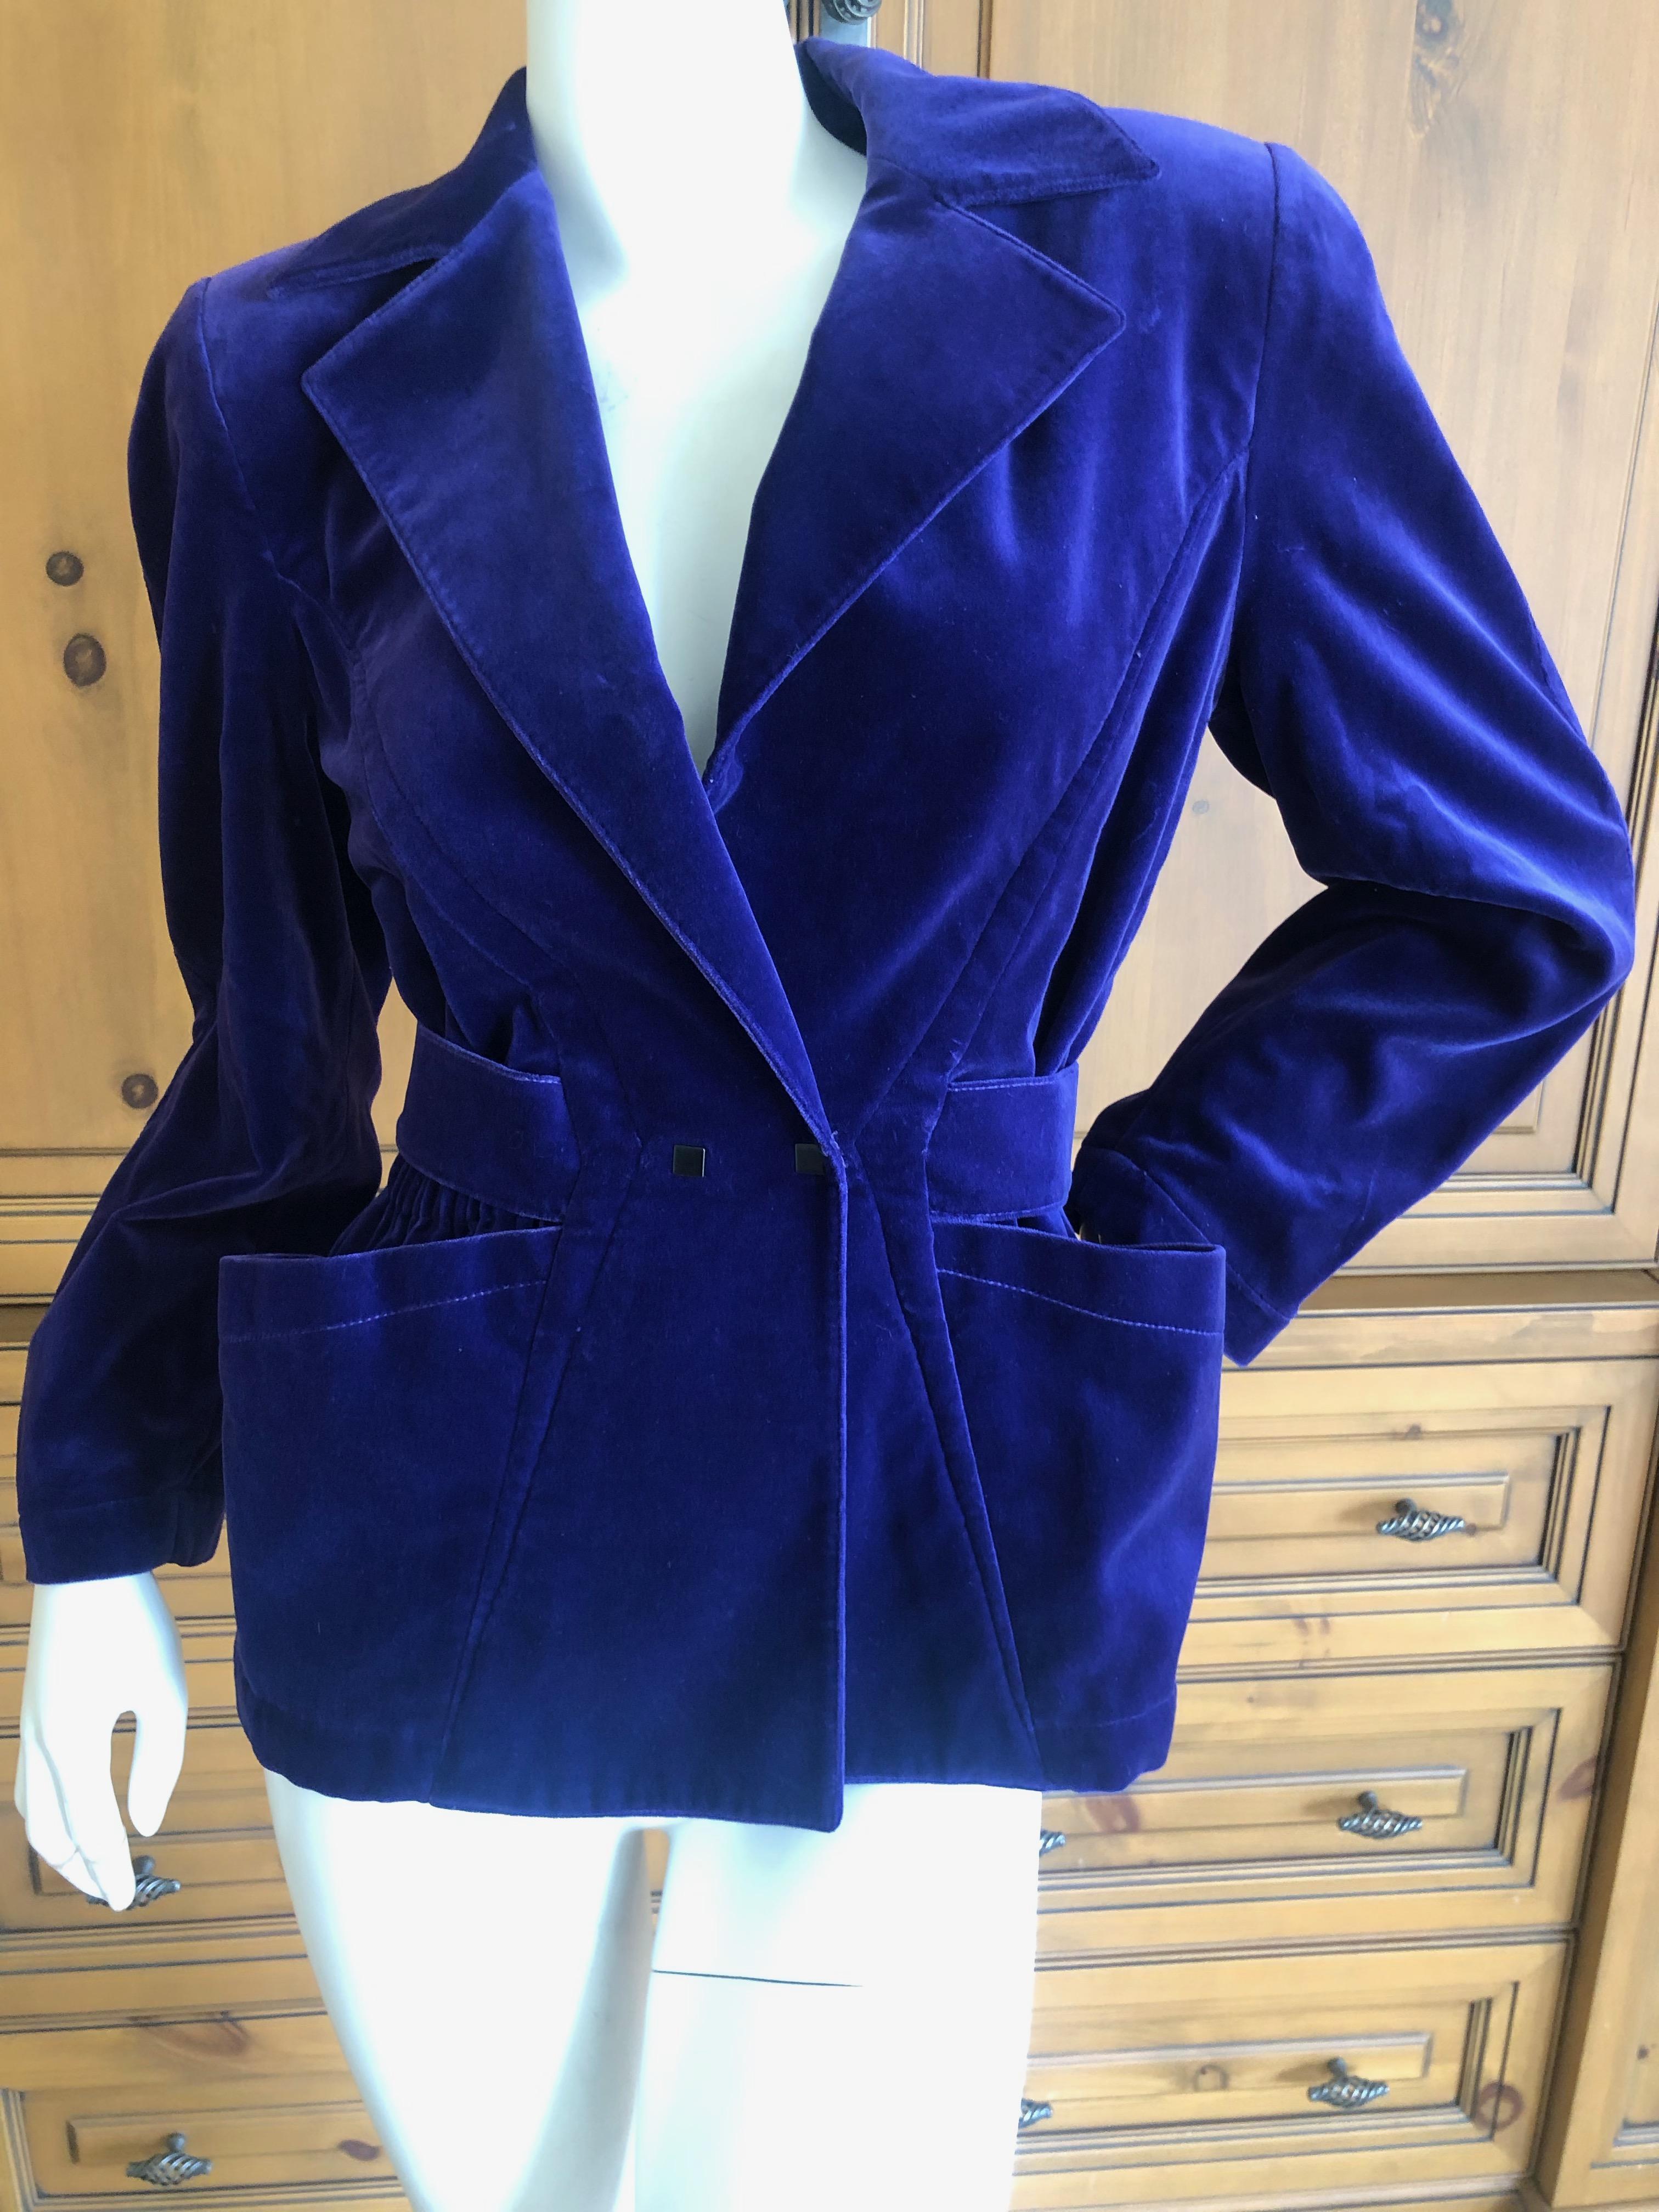 Thierry Mugler Vintage 1980's Blue Velvet Jacket with Back Belt
This is wonderful, and photos don't begin to capture it.
No size tag, size Small
Bust 38